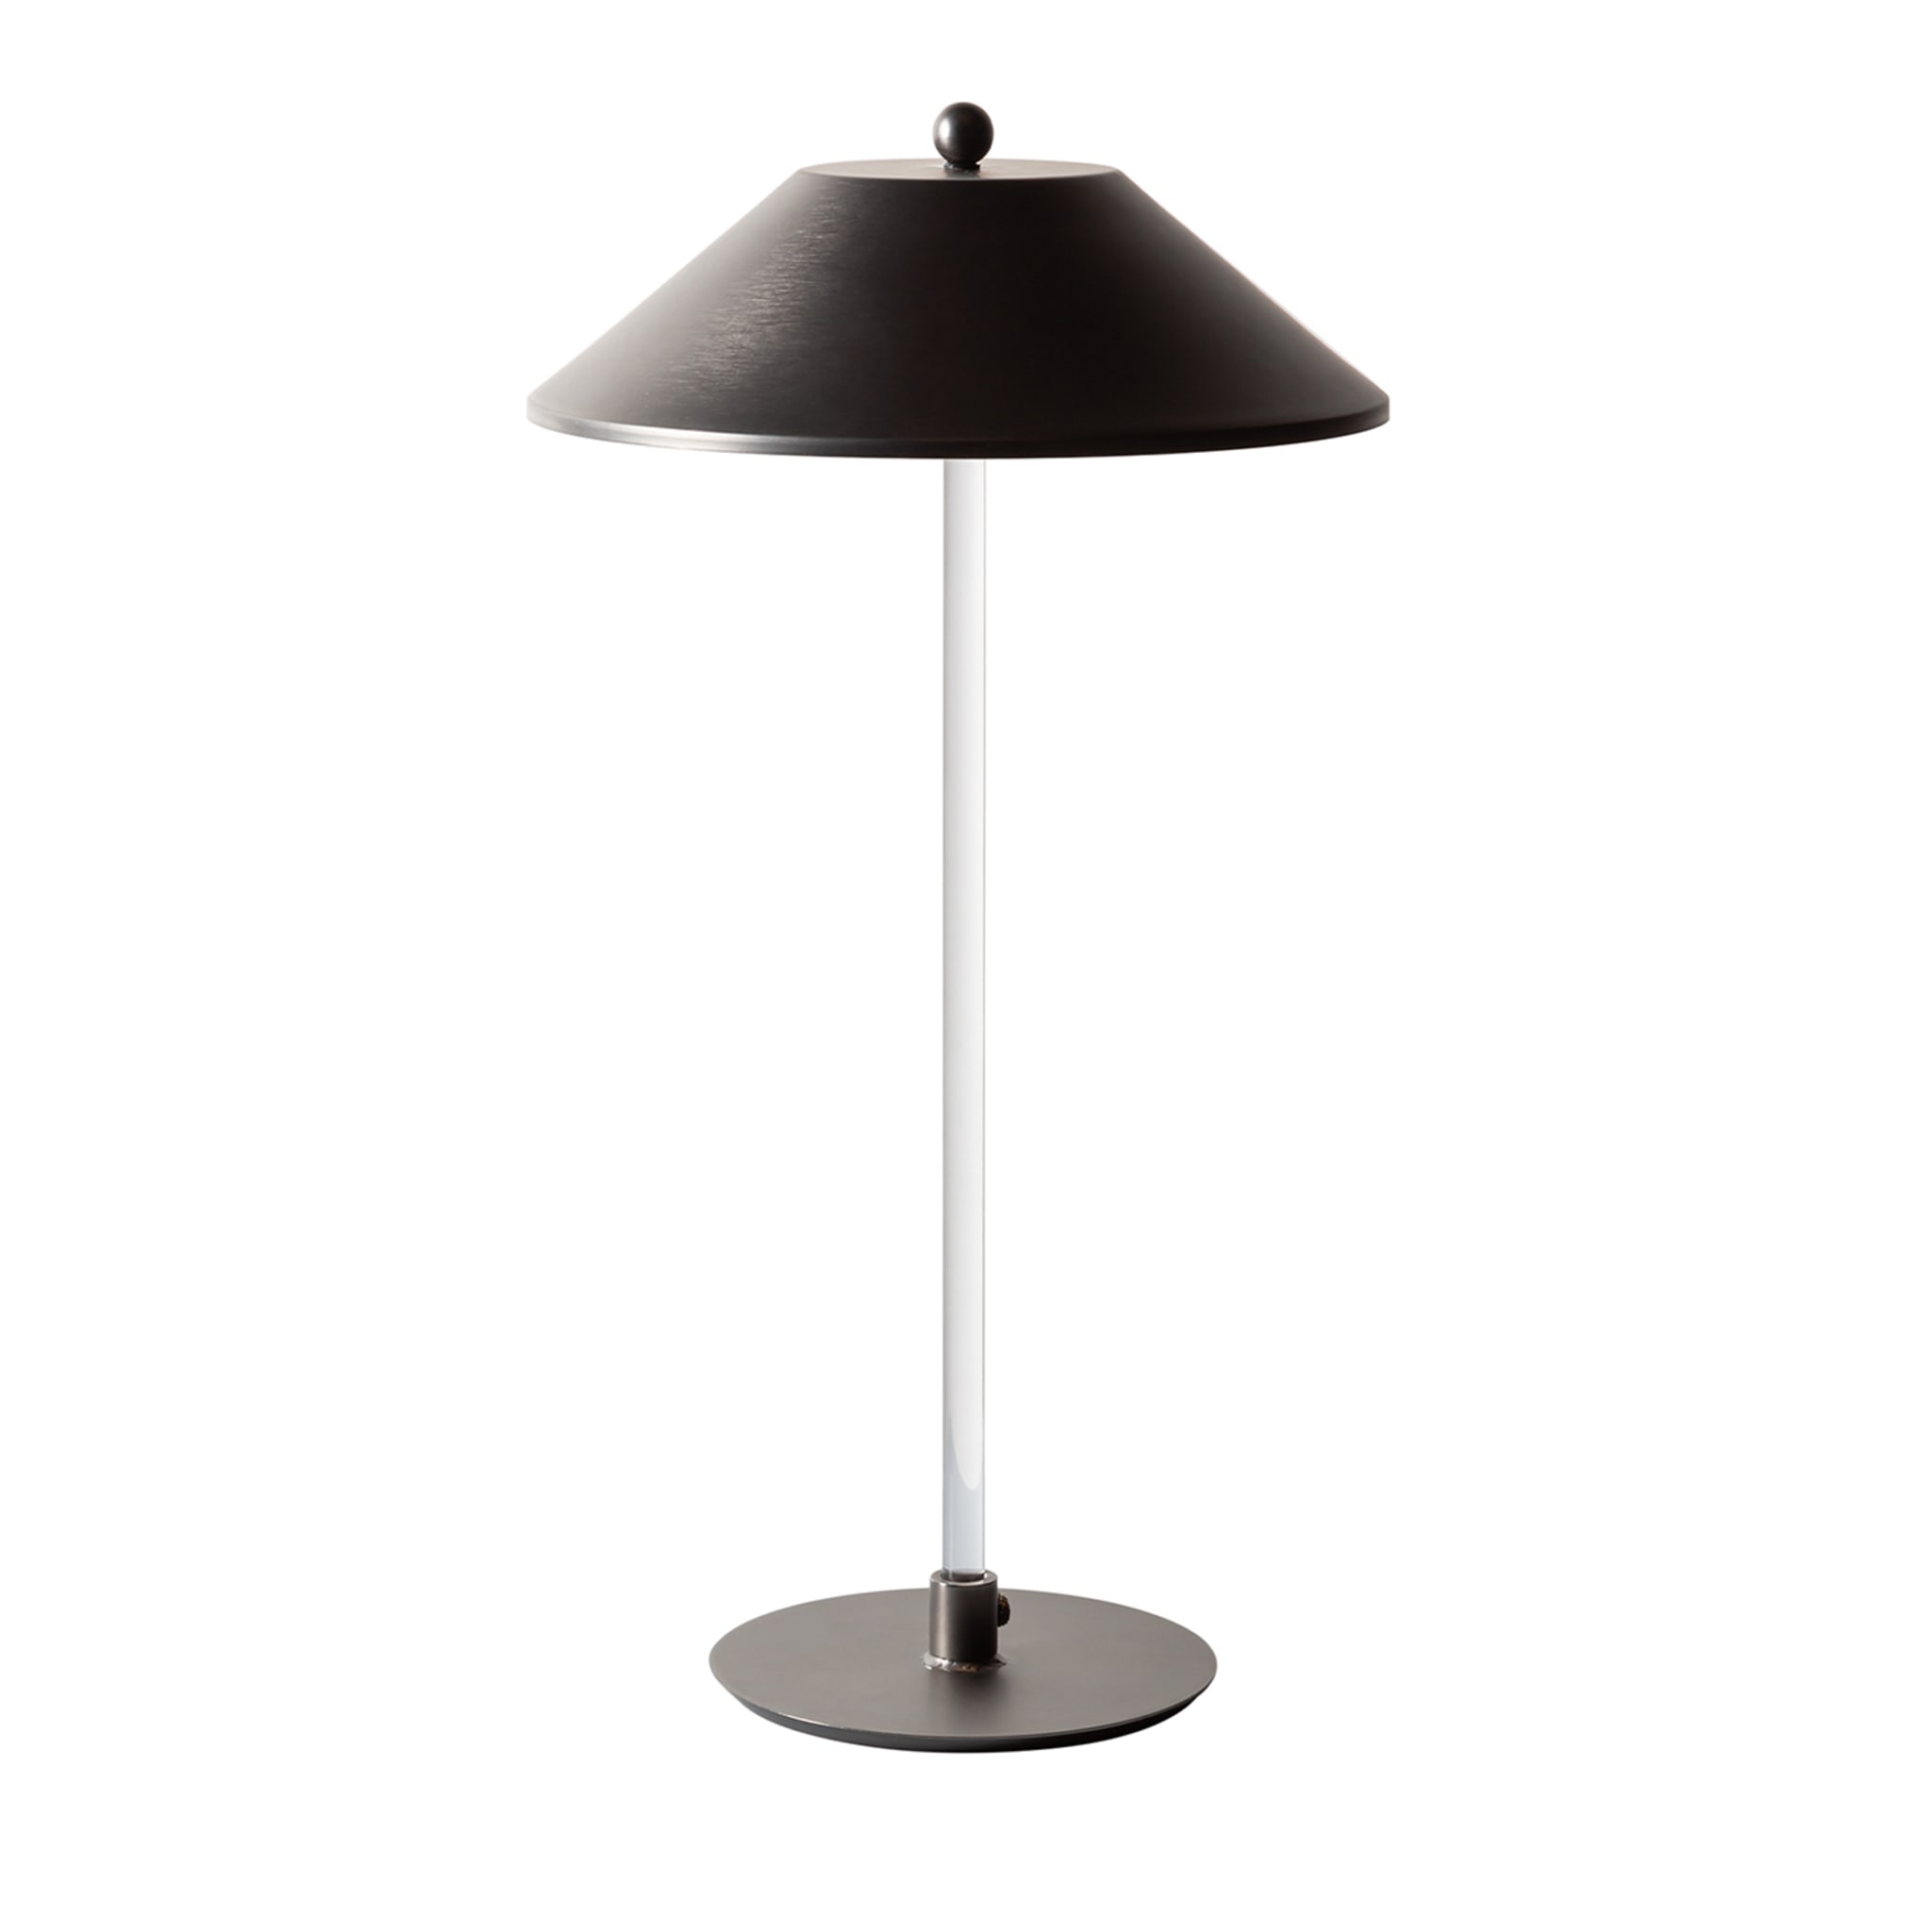 Candilee Black Table Lamp by Isacco Brioschi - Main view